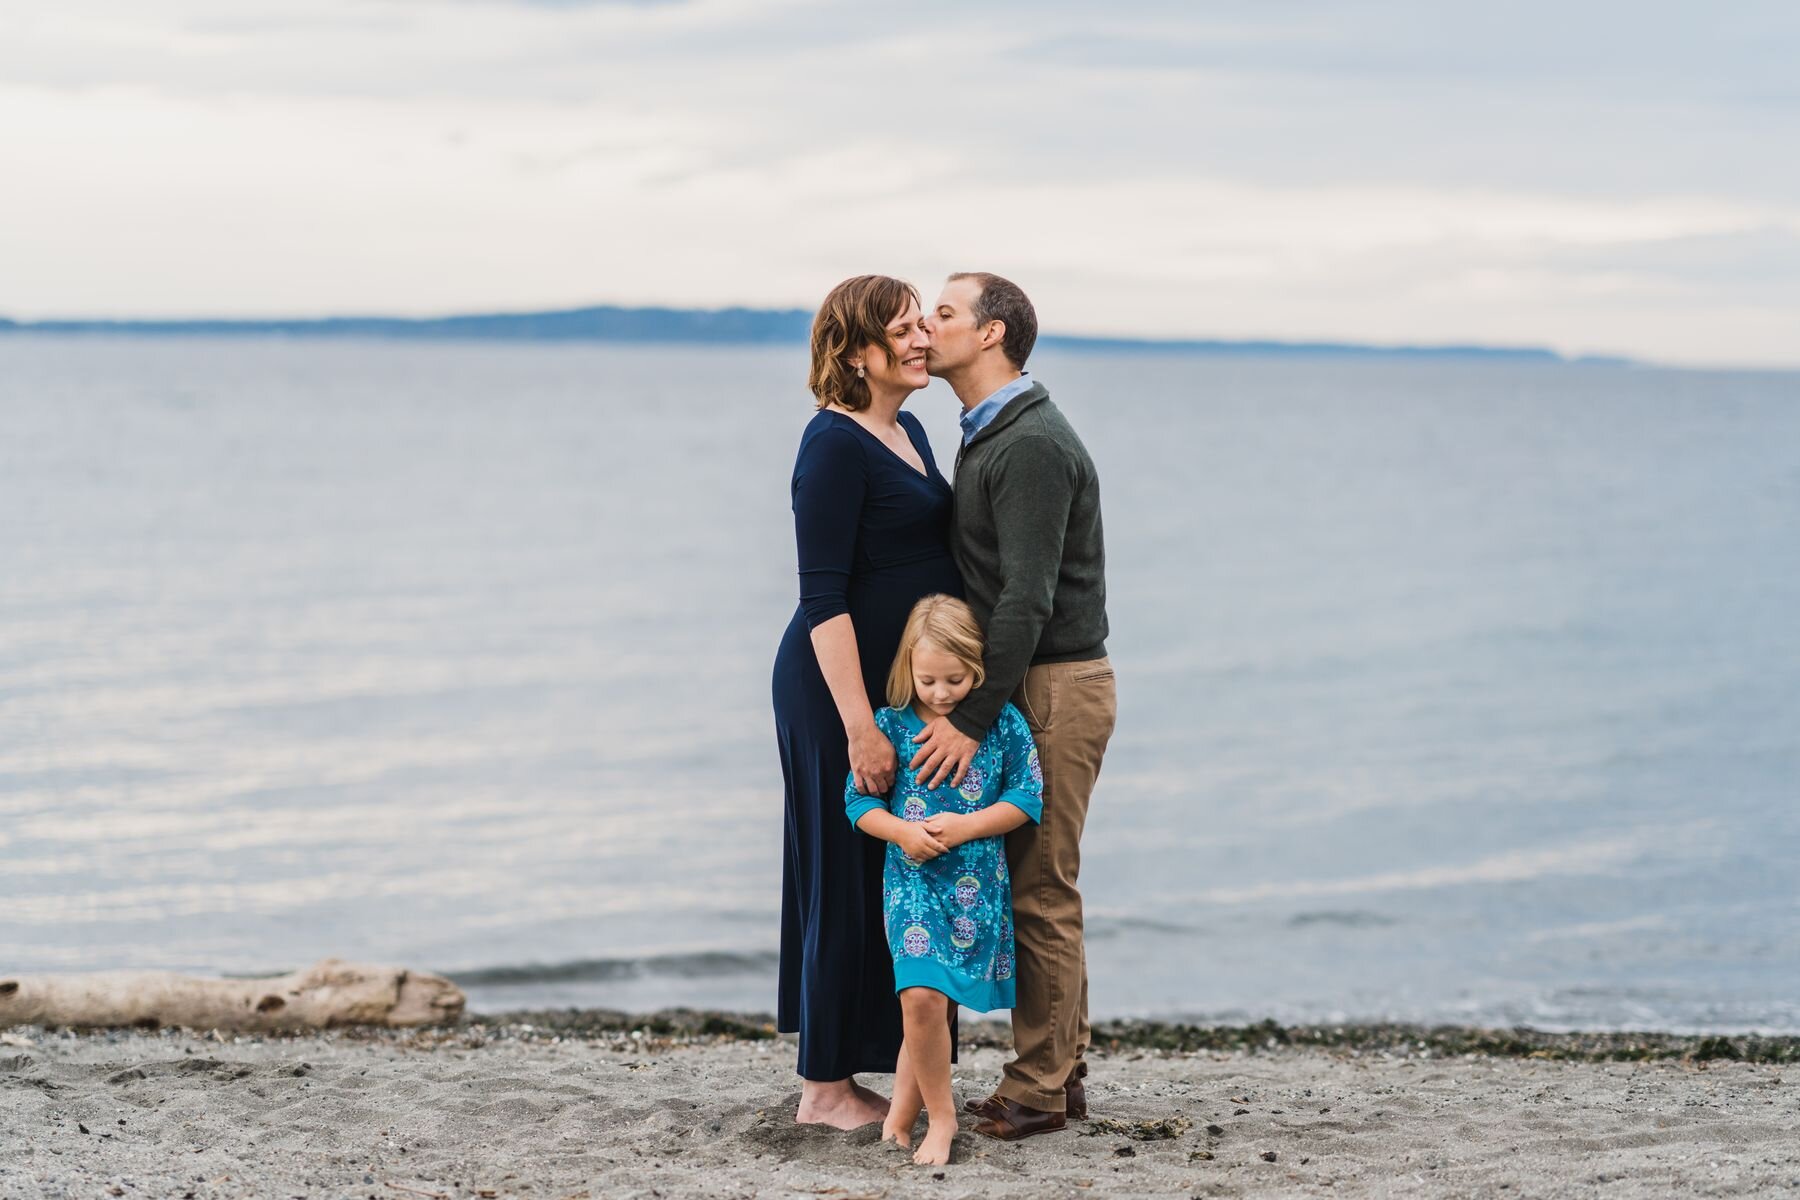 Seattle beach maternity session Sammamish Family photographer Family of 3 enjoying each other